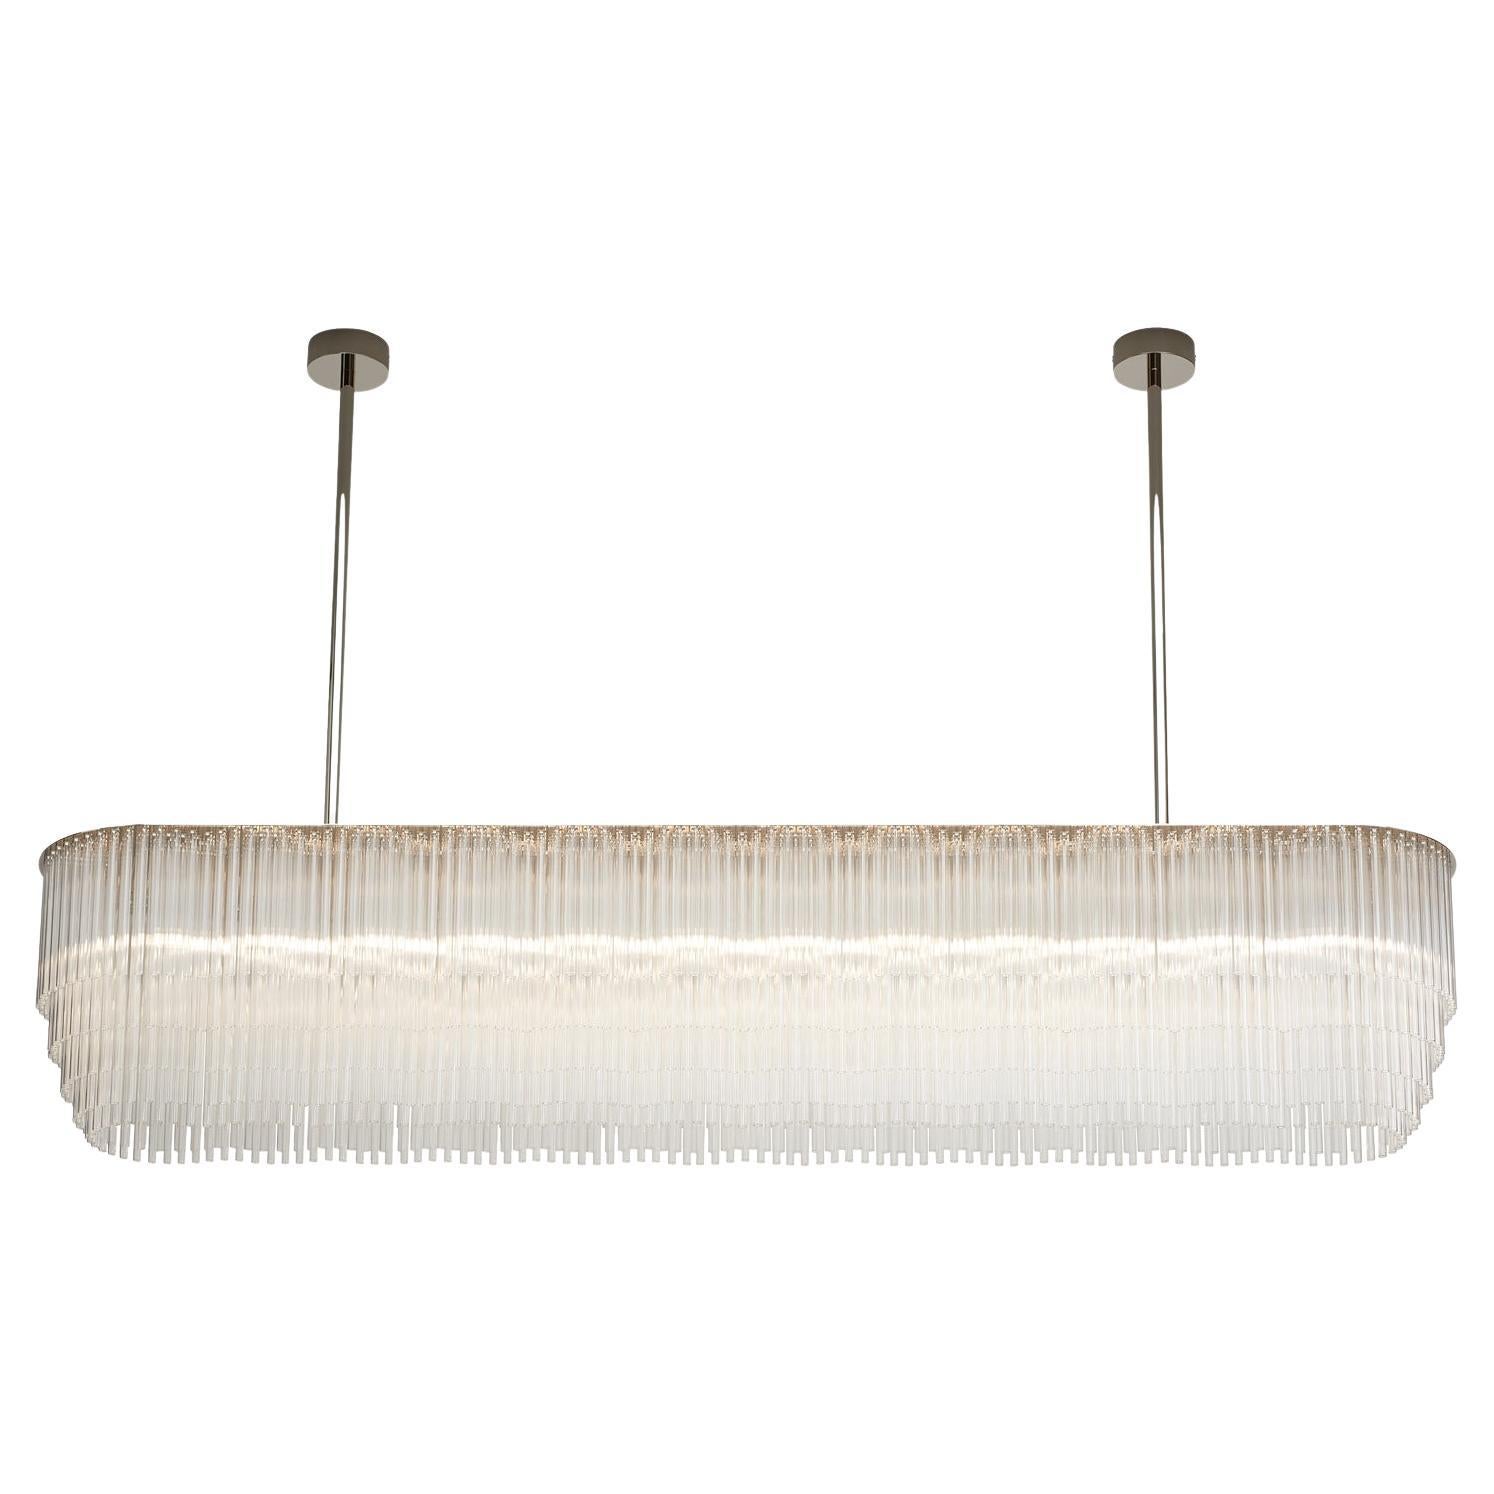 Linear Chandelier 1915mm / 75.25" in Polished Nickel, with Tiered Glass Profile For Sale